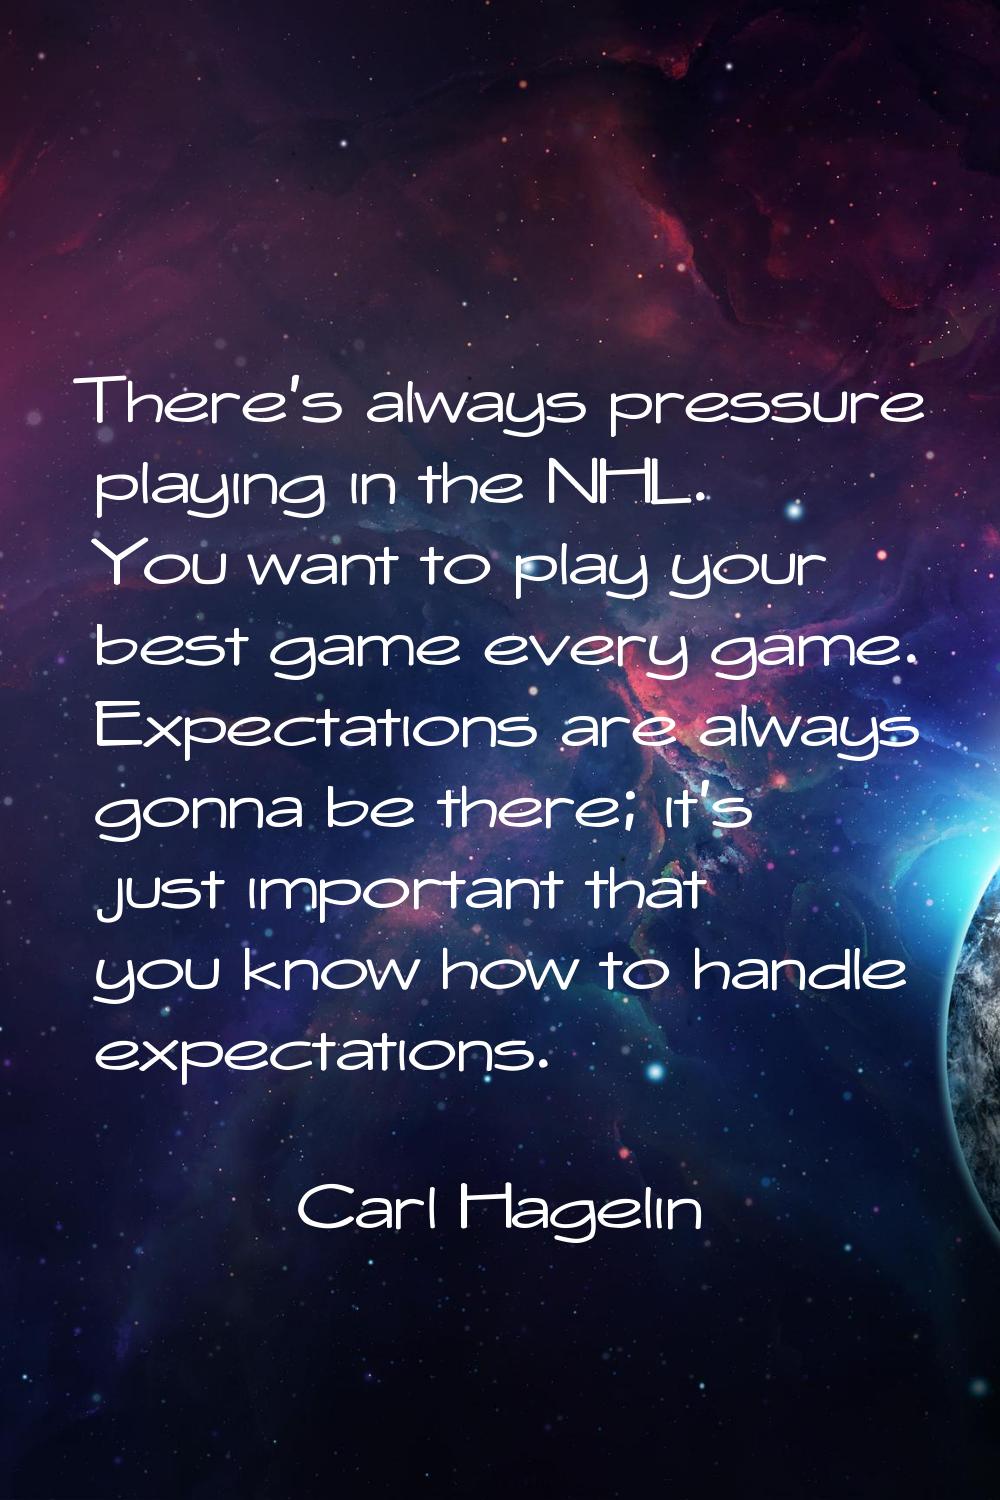 There's always pressure playing in the NHL. You want to play your best game every game. Expectation